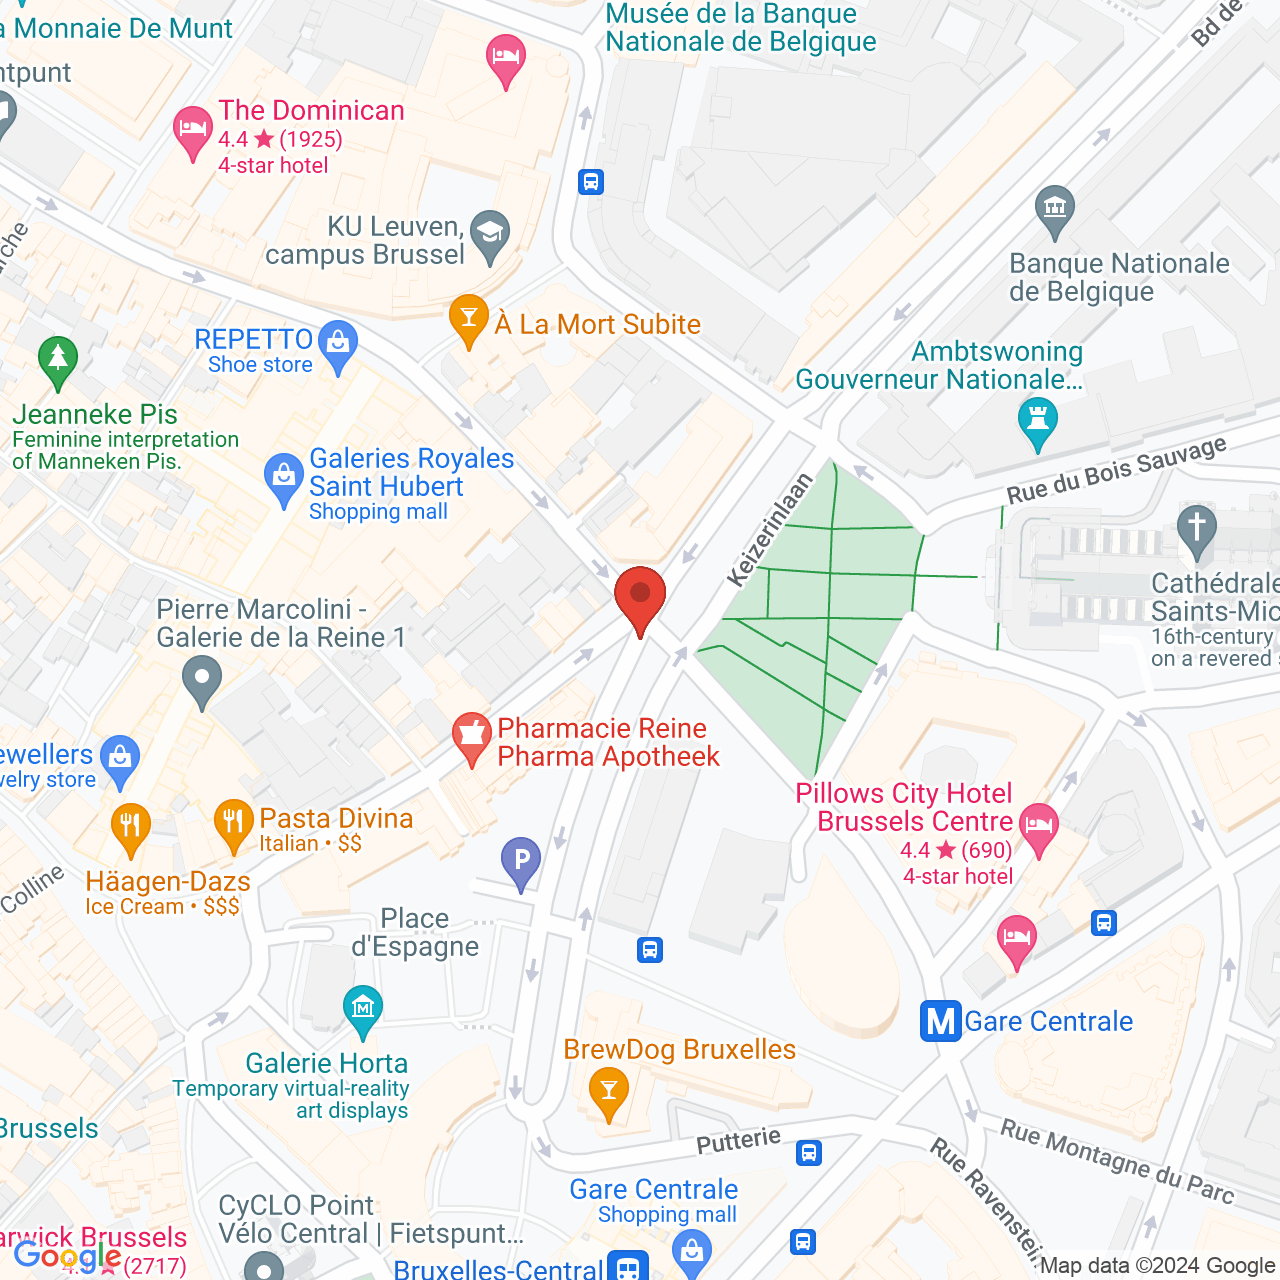 https://maps.googleapis.com/maps/api/staticmap?zoom=10&maptype=hybrid&scale=4&center=50.8476424,4.3571696&markers=color:red%7C%7C50.8476424,4.3571696&size=1000x1000&key=AIzaSyAQg6Liu52-a7wn17F9B-5c4QmJ9kTO3Mo